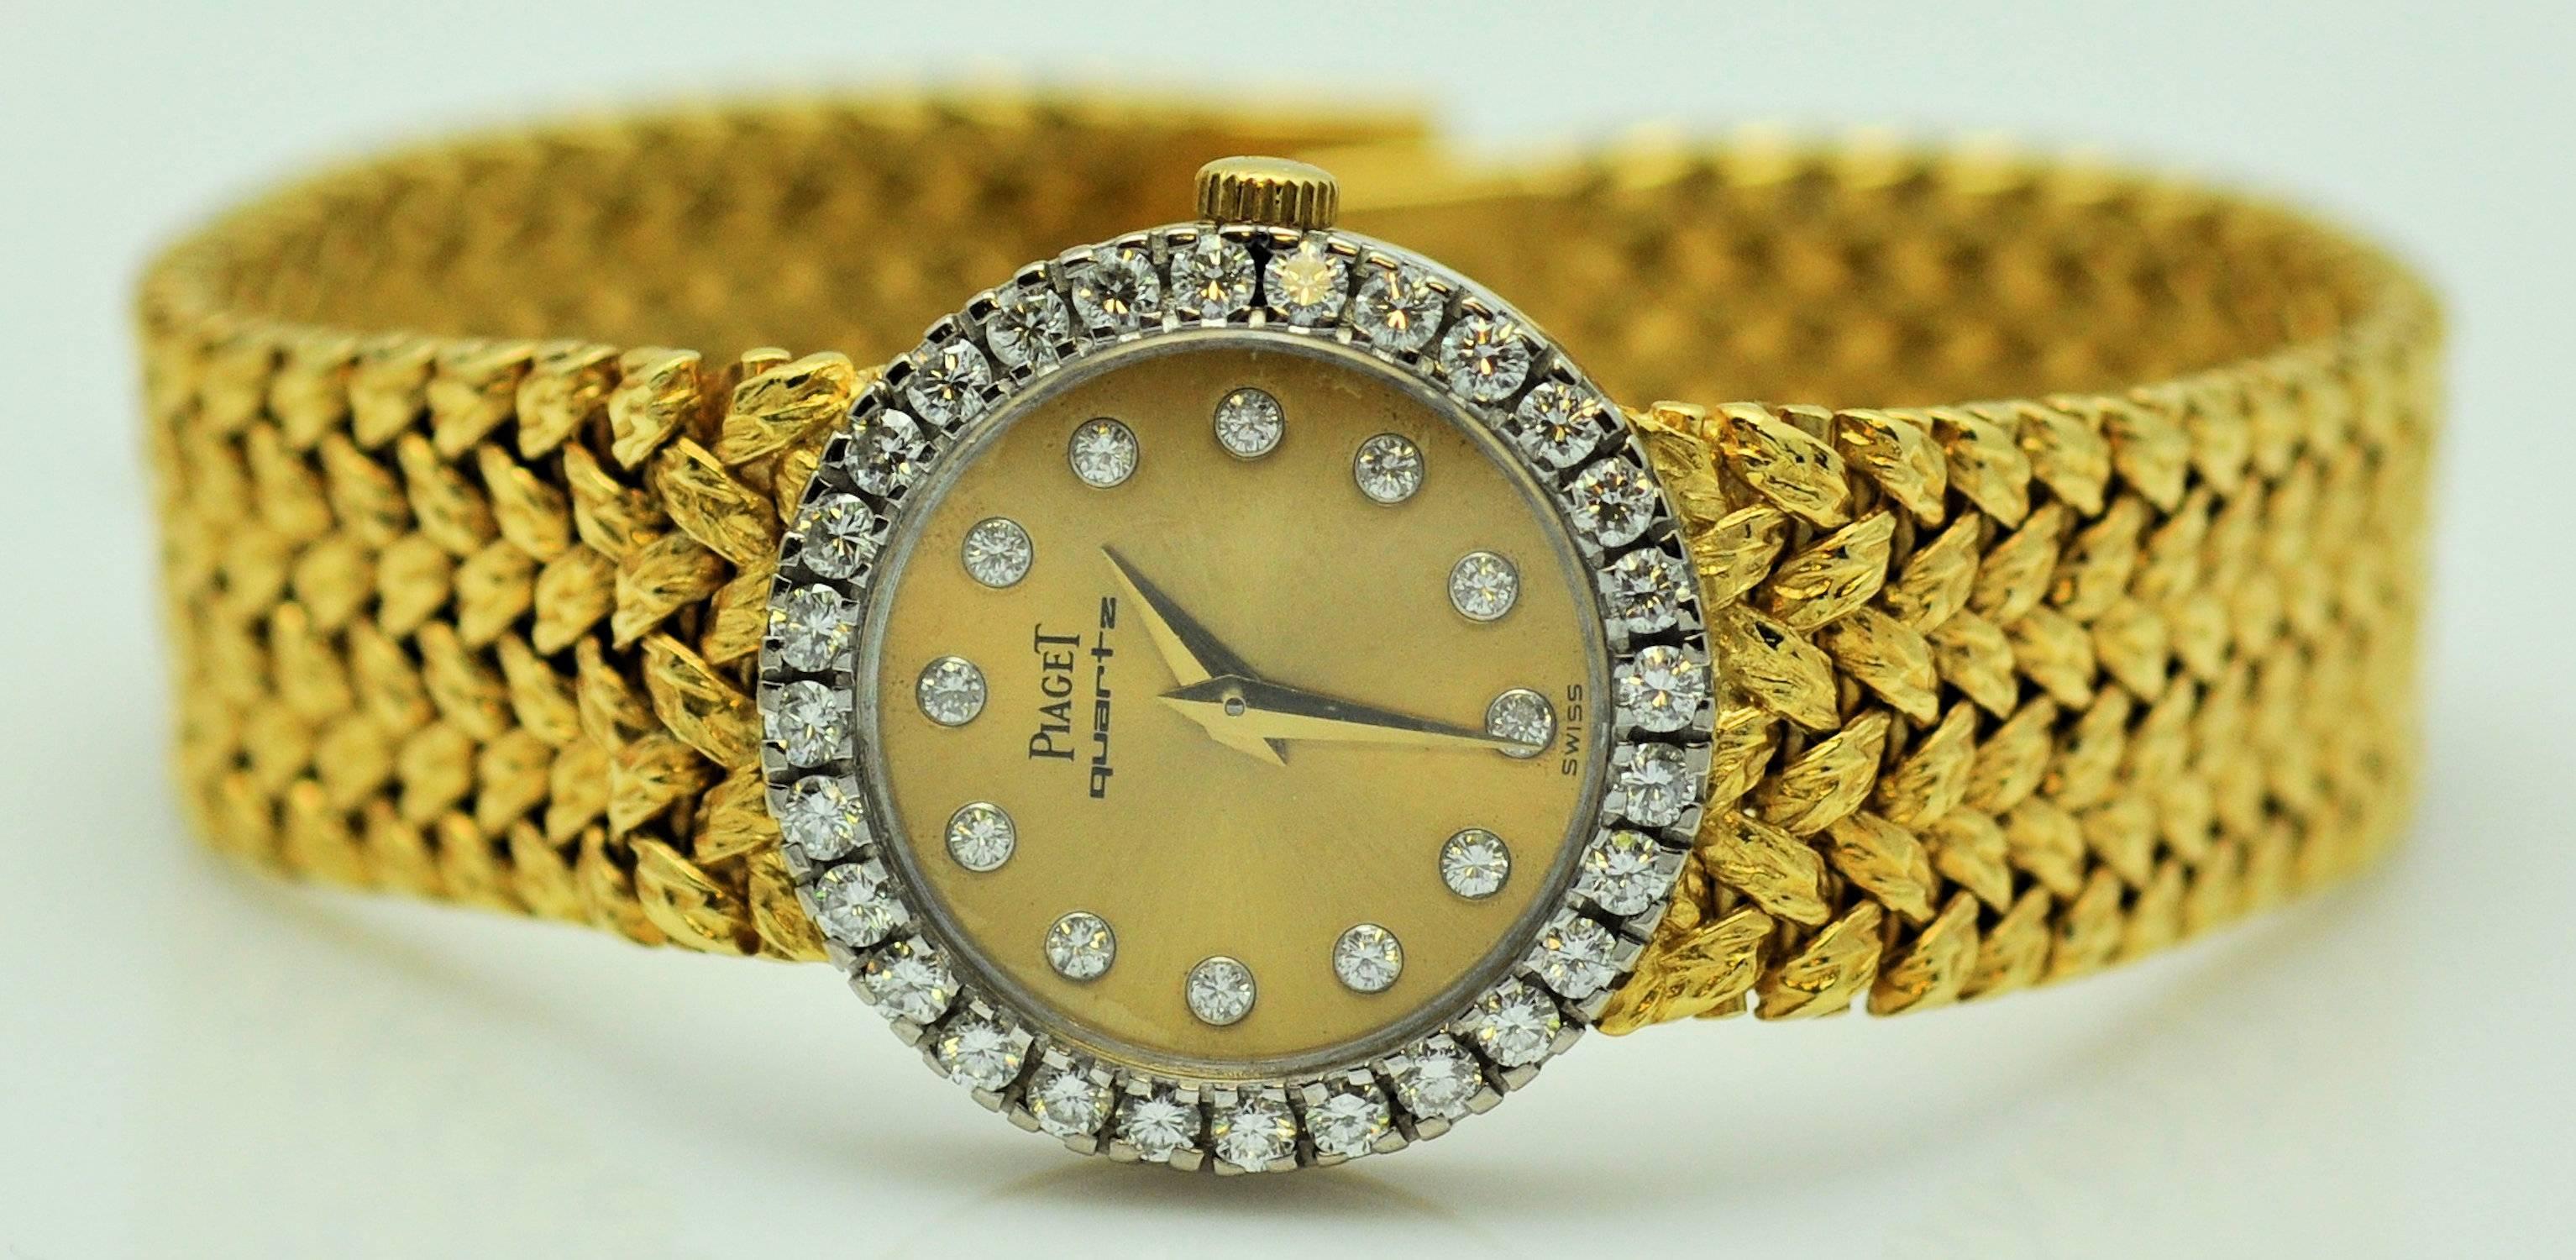 Lovely Piaget diamond dress quartz wrist watch with diamond studded dial and diamond bezel.  40 round diamonds approx. 0.68 ct. total weight of very fine quality, VVS-2, G. Box. Extra gold from bracelet. Running and good order. 33 dwt gross wt. 